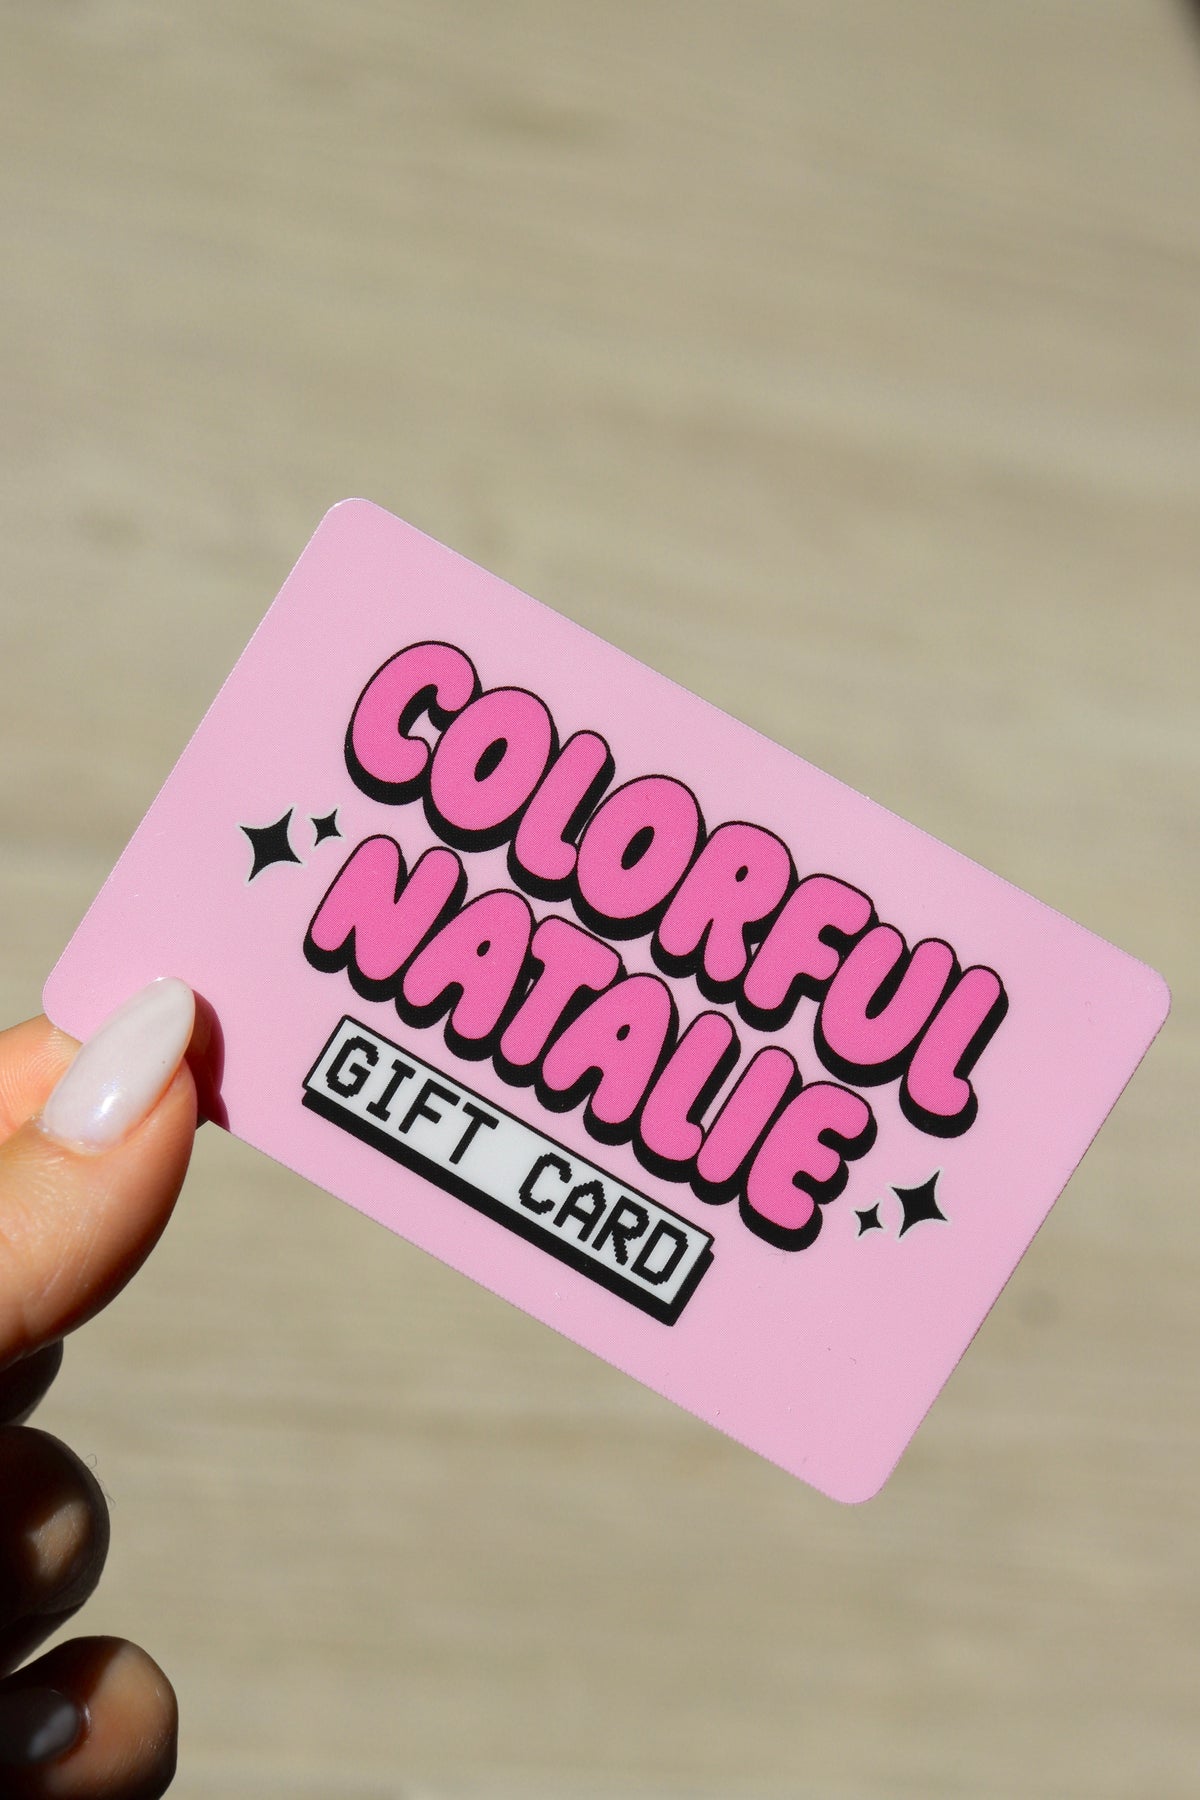 Colorful Natalie Physical Gift Card